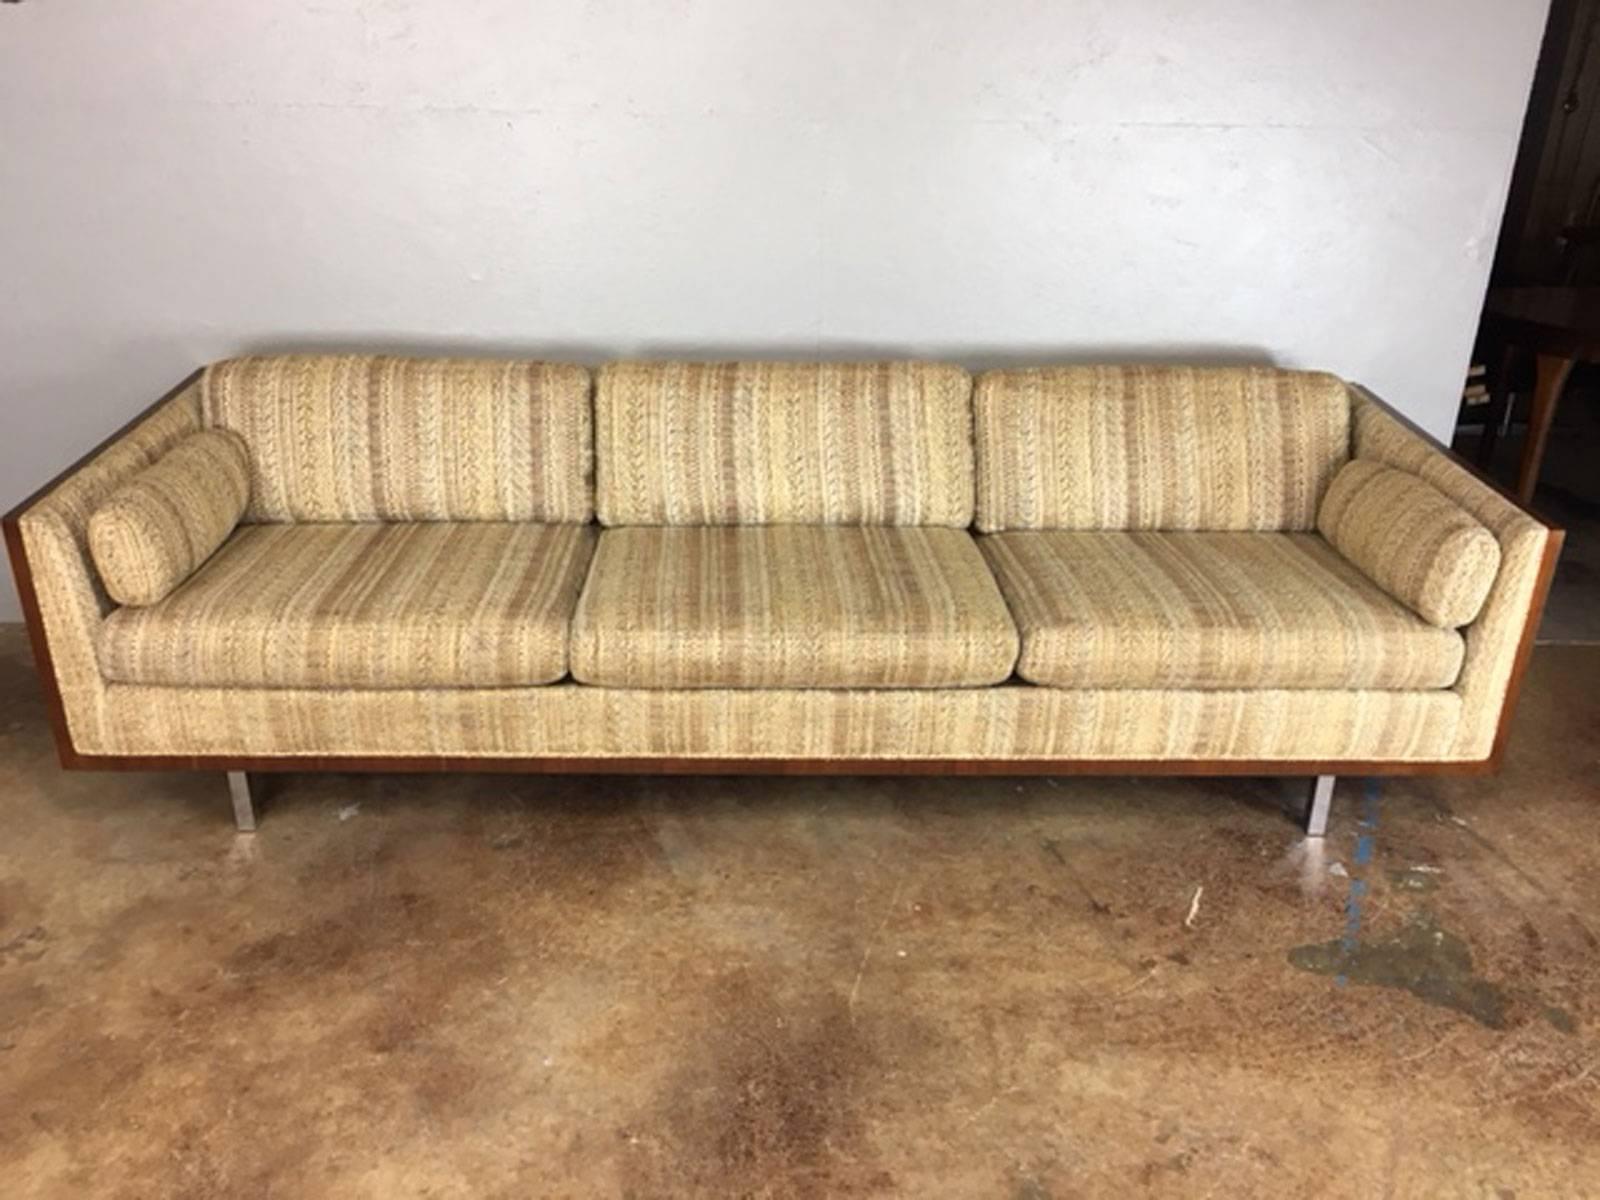 Unique walnut side case sofa by Milo Baughman with stainless steel legs. Sleek look on a low rise back sofa. Original upholstery. No rips, holes, tears, or unusual wear. Use it as is or have us reupholster it in a modern, fresh look for $1,000 more.